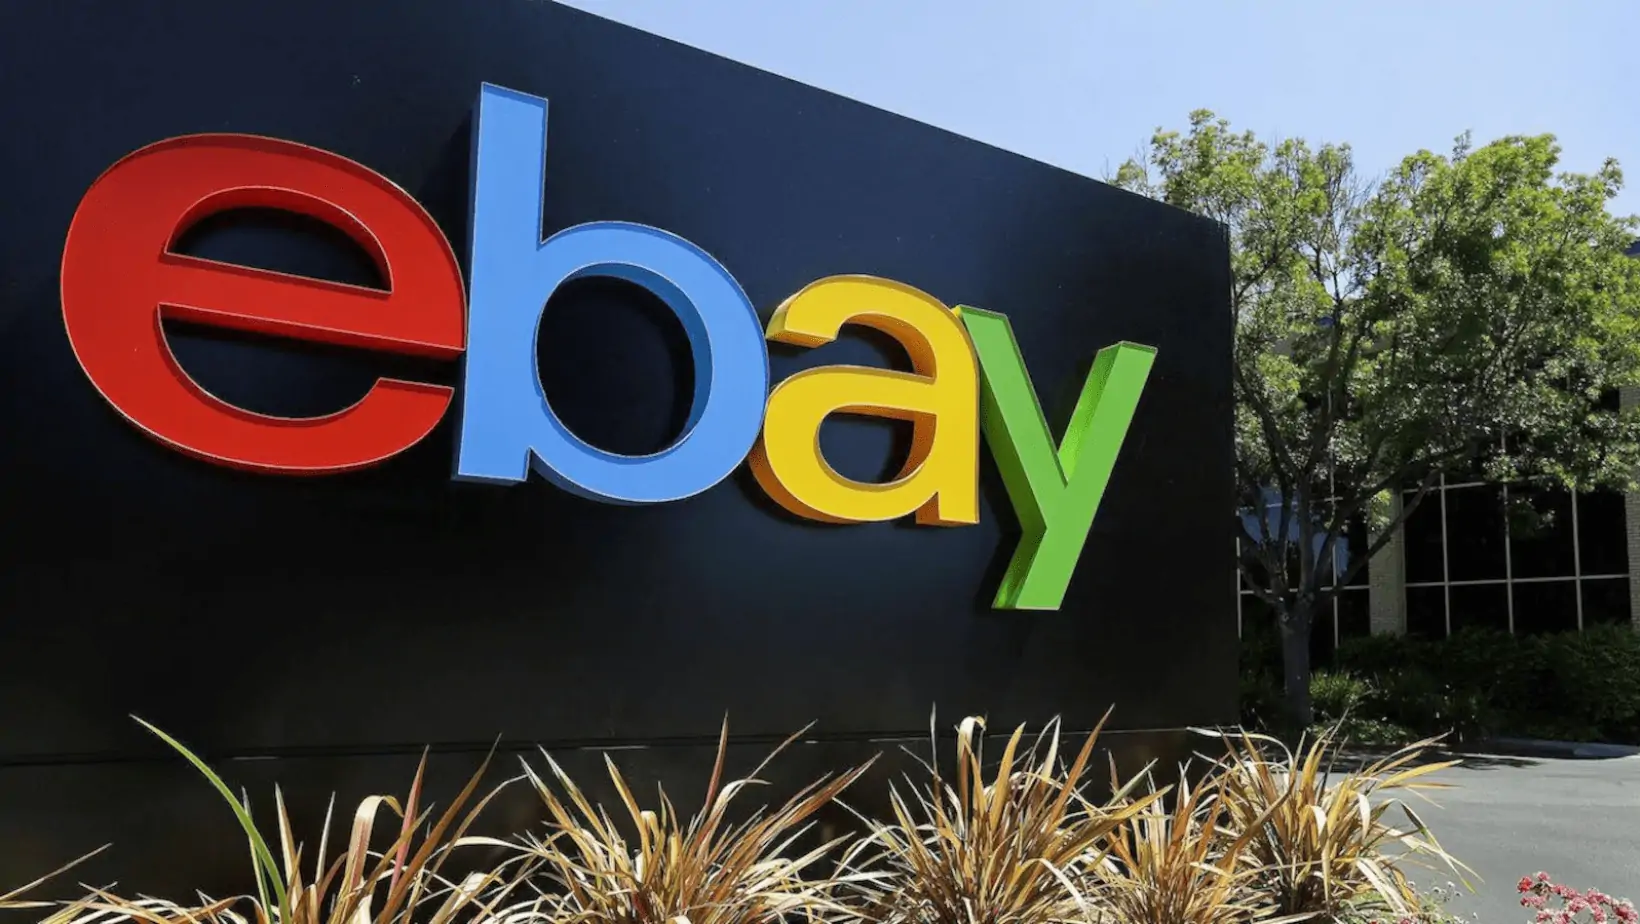 eBay Announces Significant Workforce Reduction and Organizational Changes